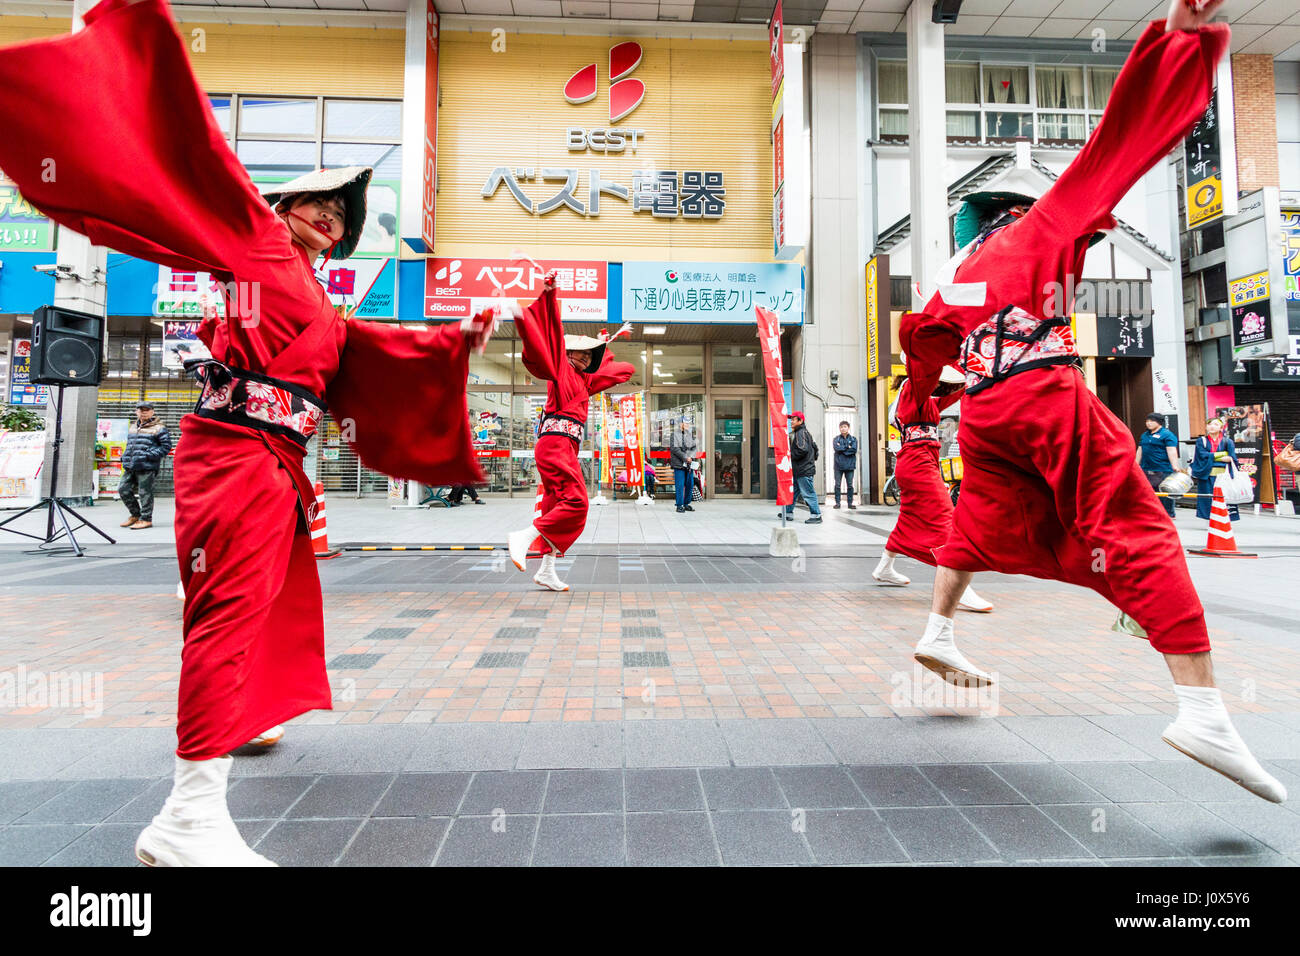 Hinokuni Yosakoi Dance Festival. Team dressed in red farmer costumes with straw hat, dancing in shopping mall. Low angle wide view. Stock Photo